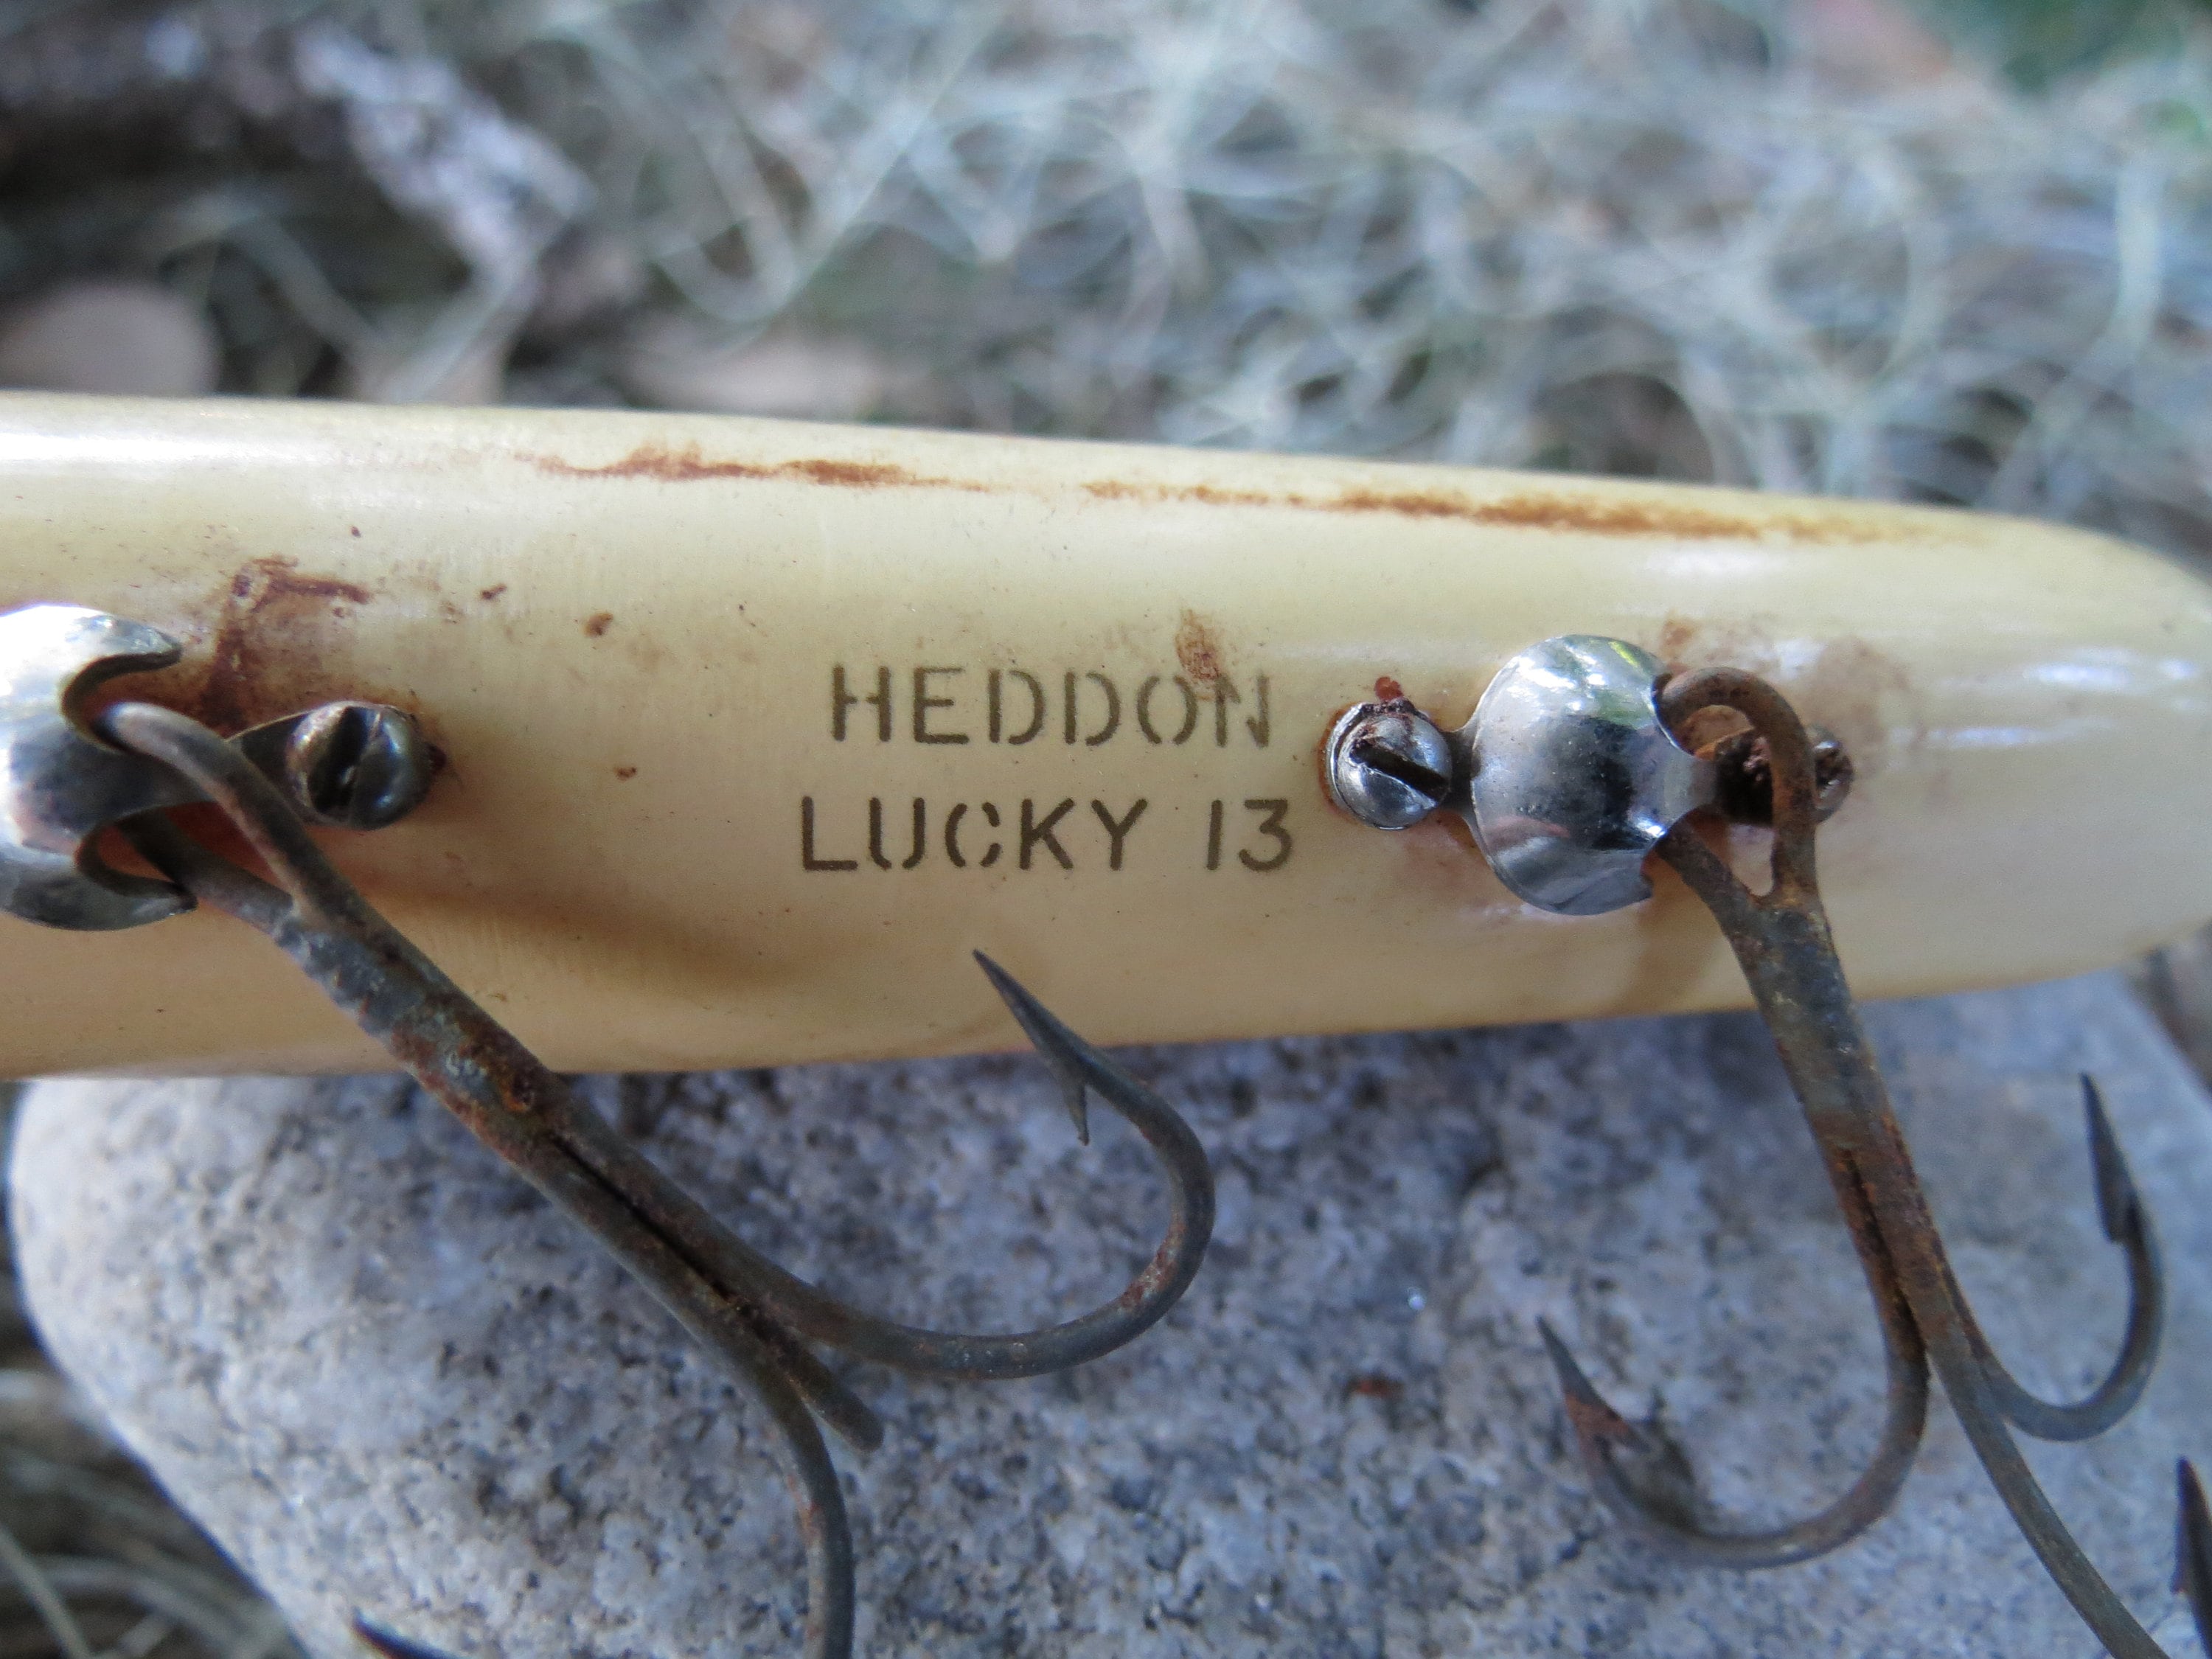 Heddon Baby Lucky 13 Value